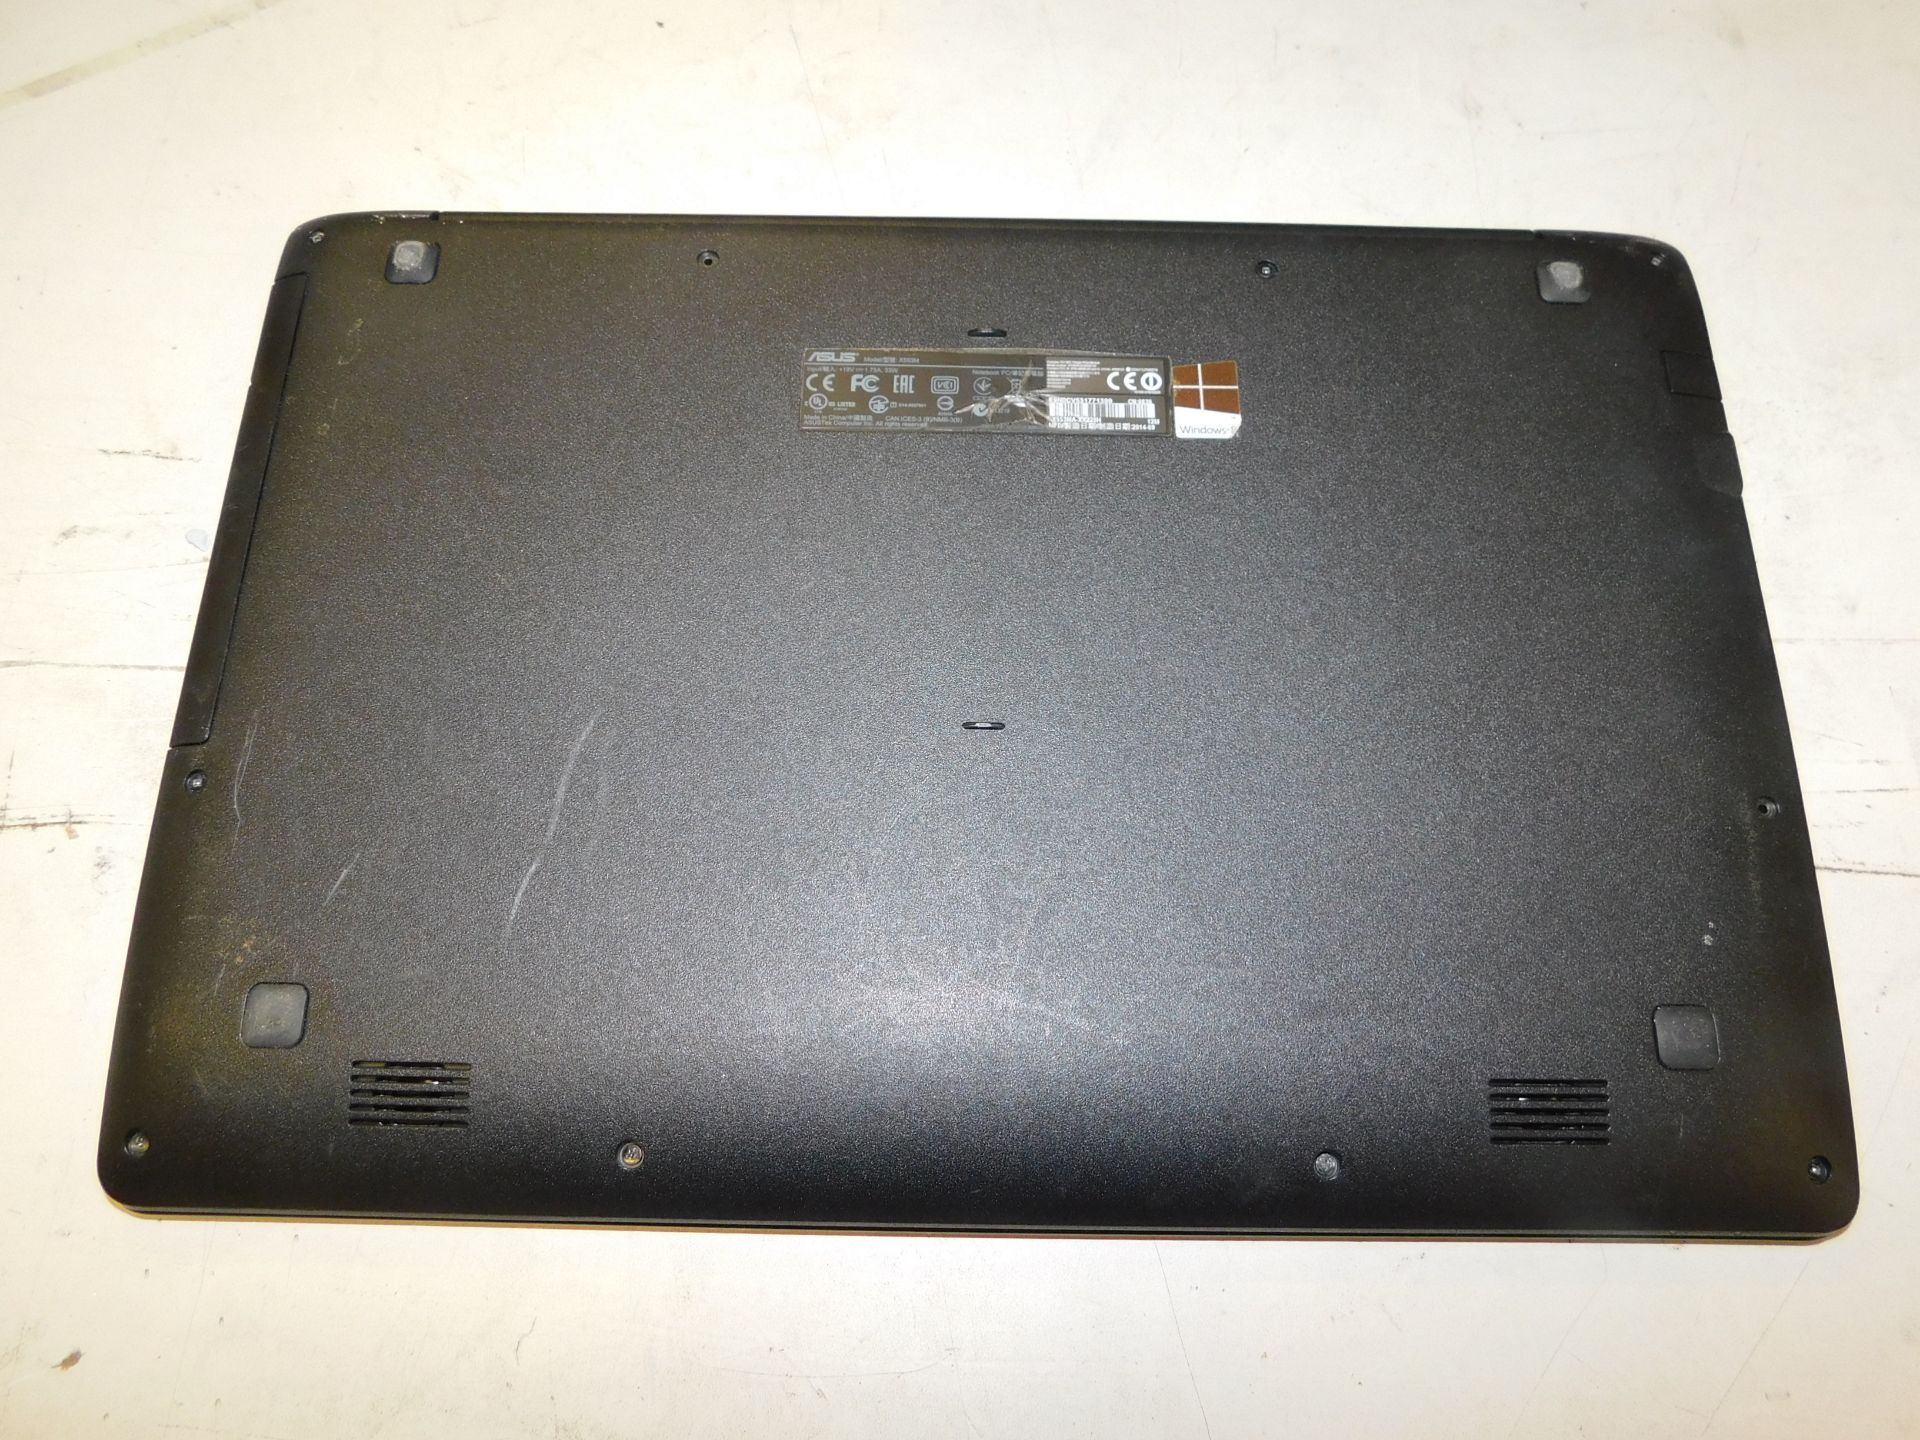 Asus X553M Laptop (No PSU) (No HDD) (Location: Stockport. Please Refer to General Notes) - Image 4 of 4